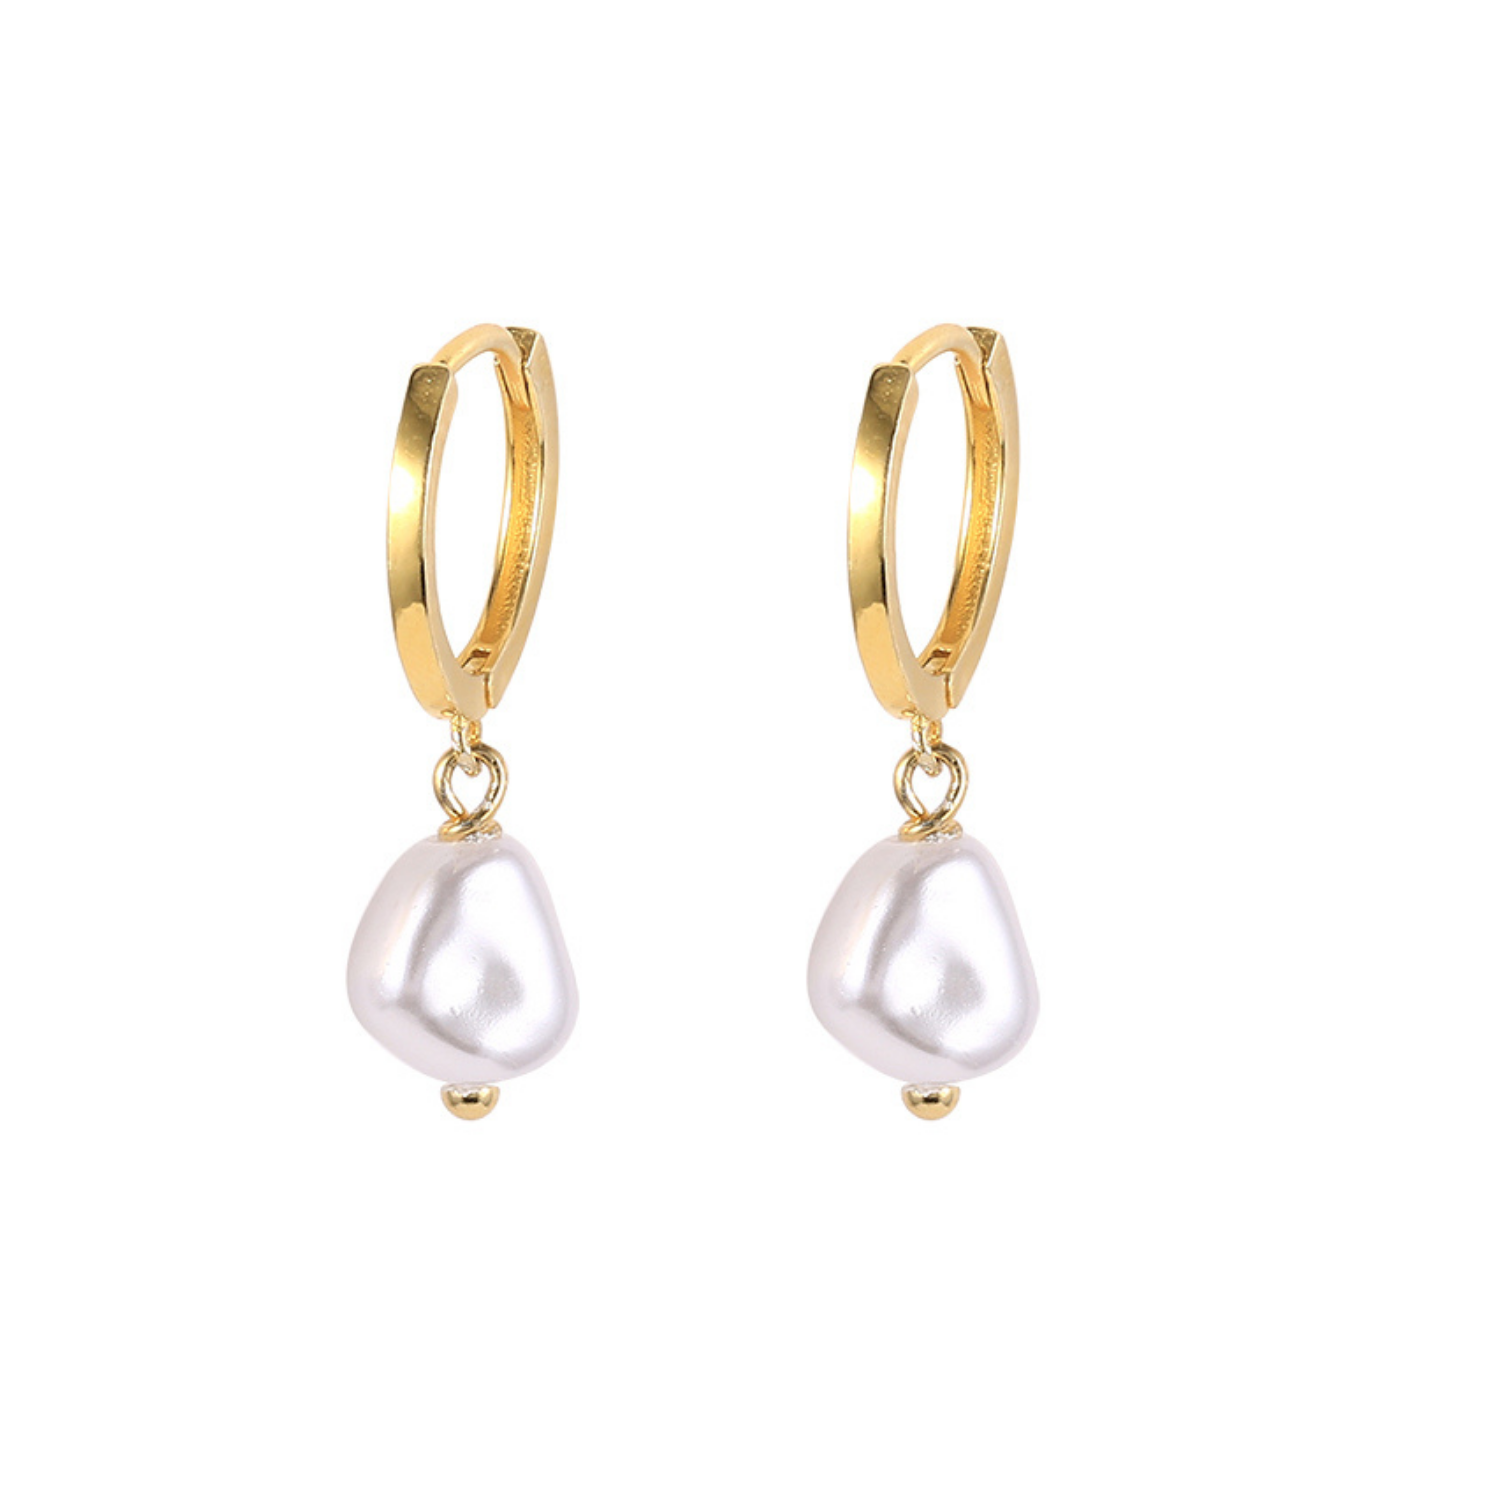 14K Gold Plated Baroque Hoops displayed against a white backdrop